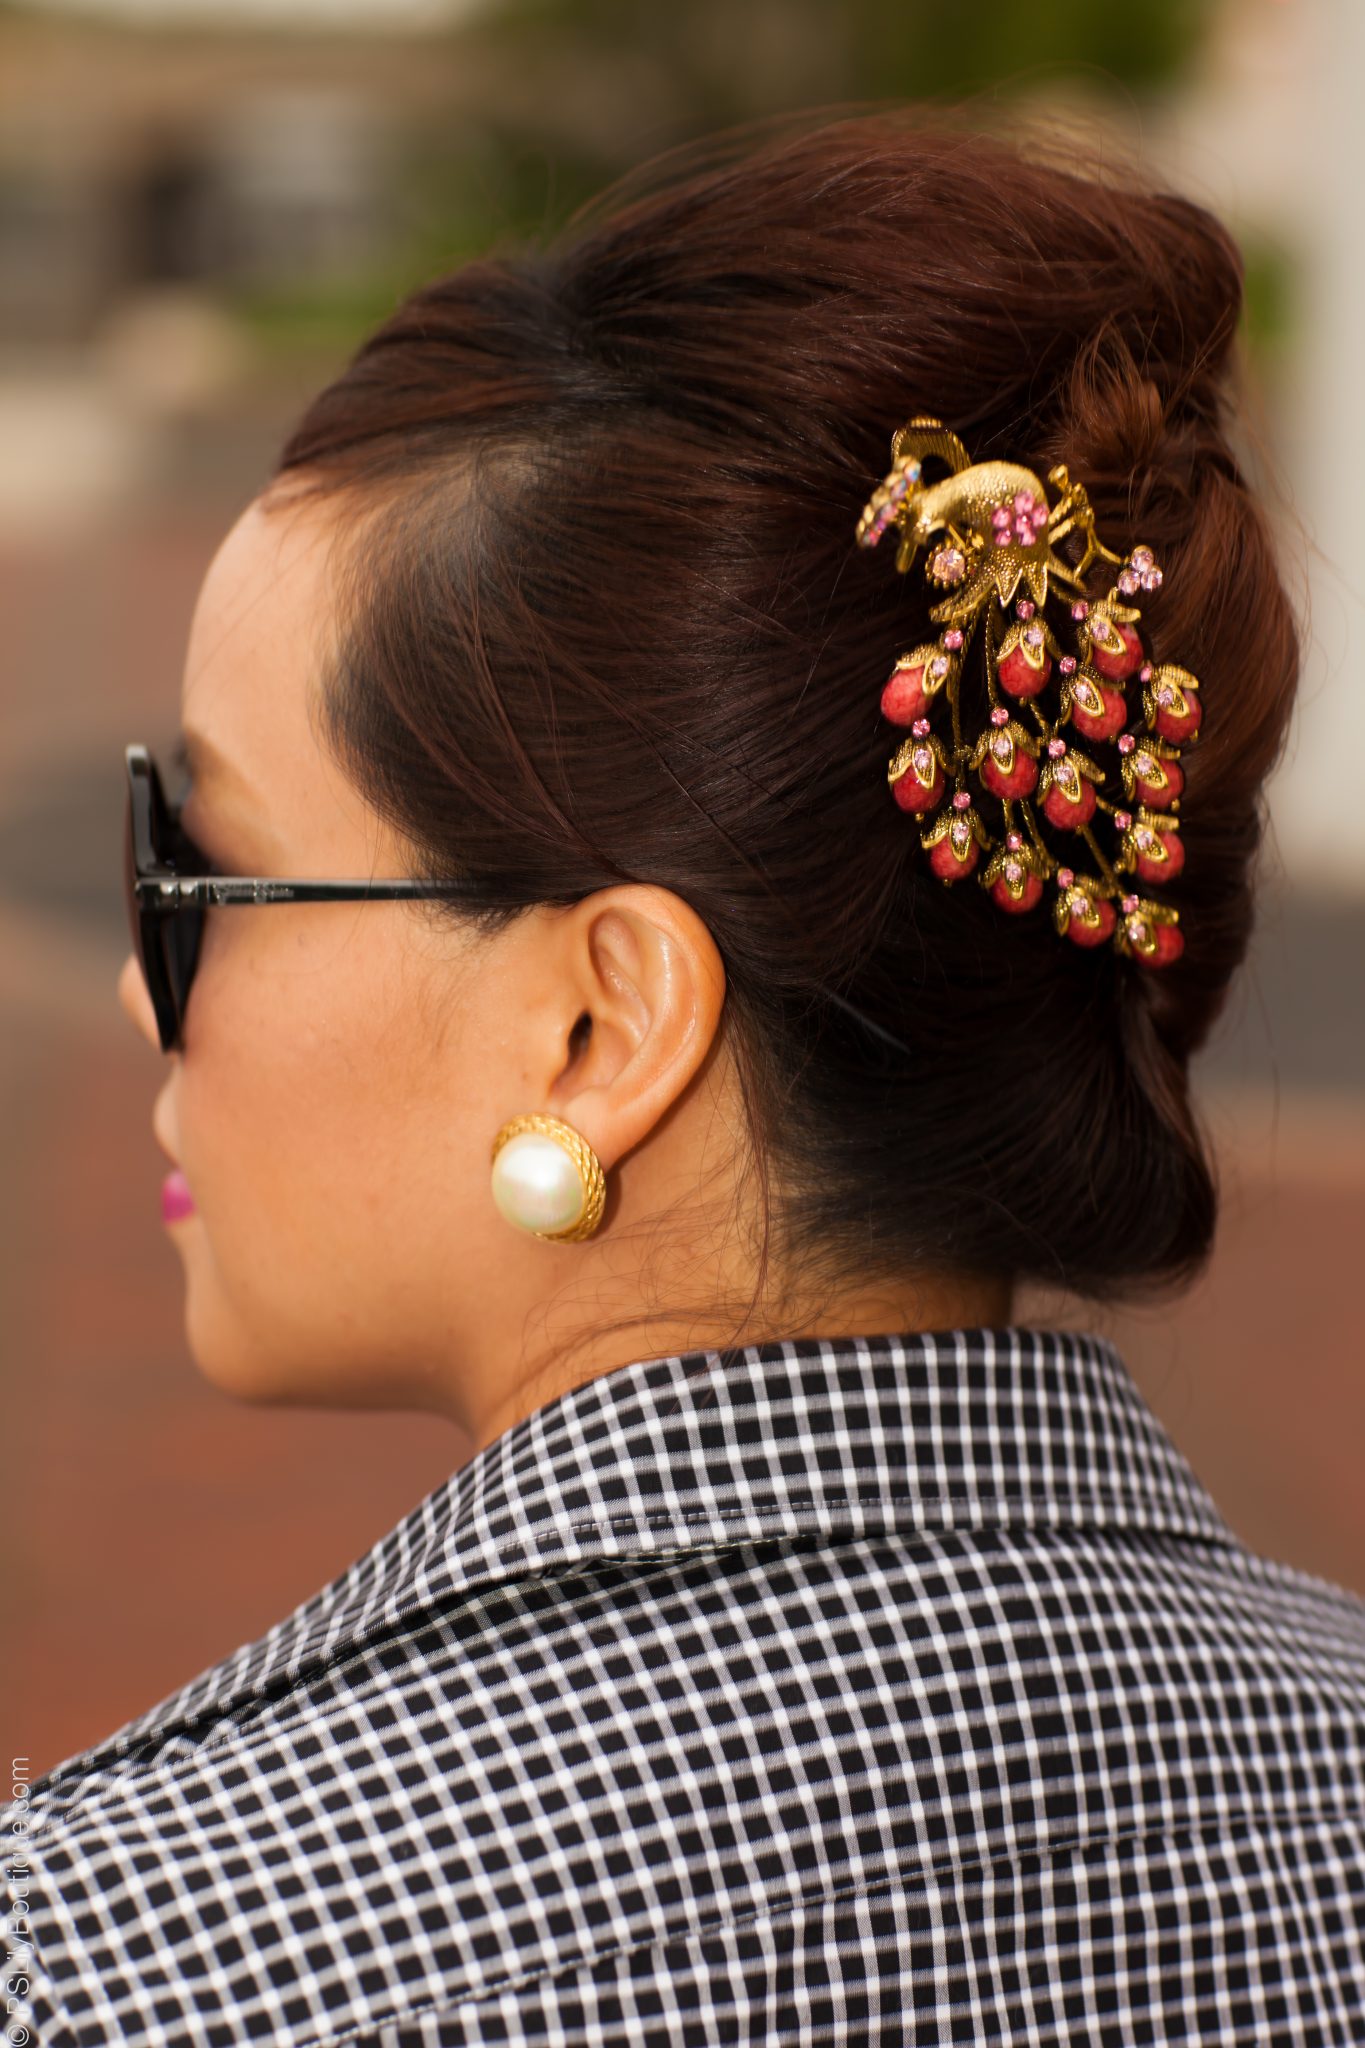 instagram-pslilyboutique-carolee-pearl-earrings-peacock-hairstyle-clip